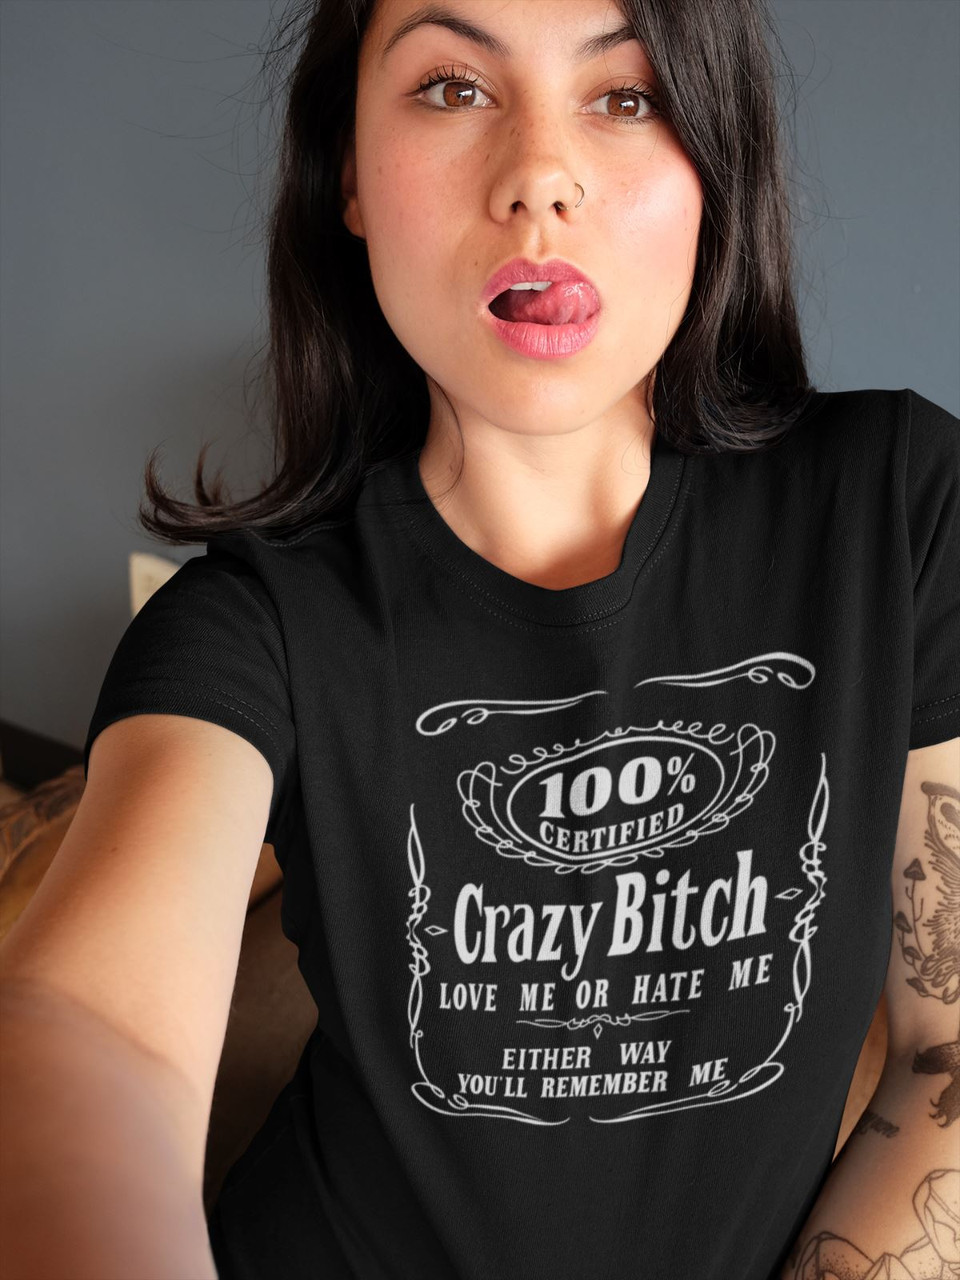 CRAZY BITCH Love Me or Hate Me funny Girls T-shirts - Ladies cut ...